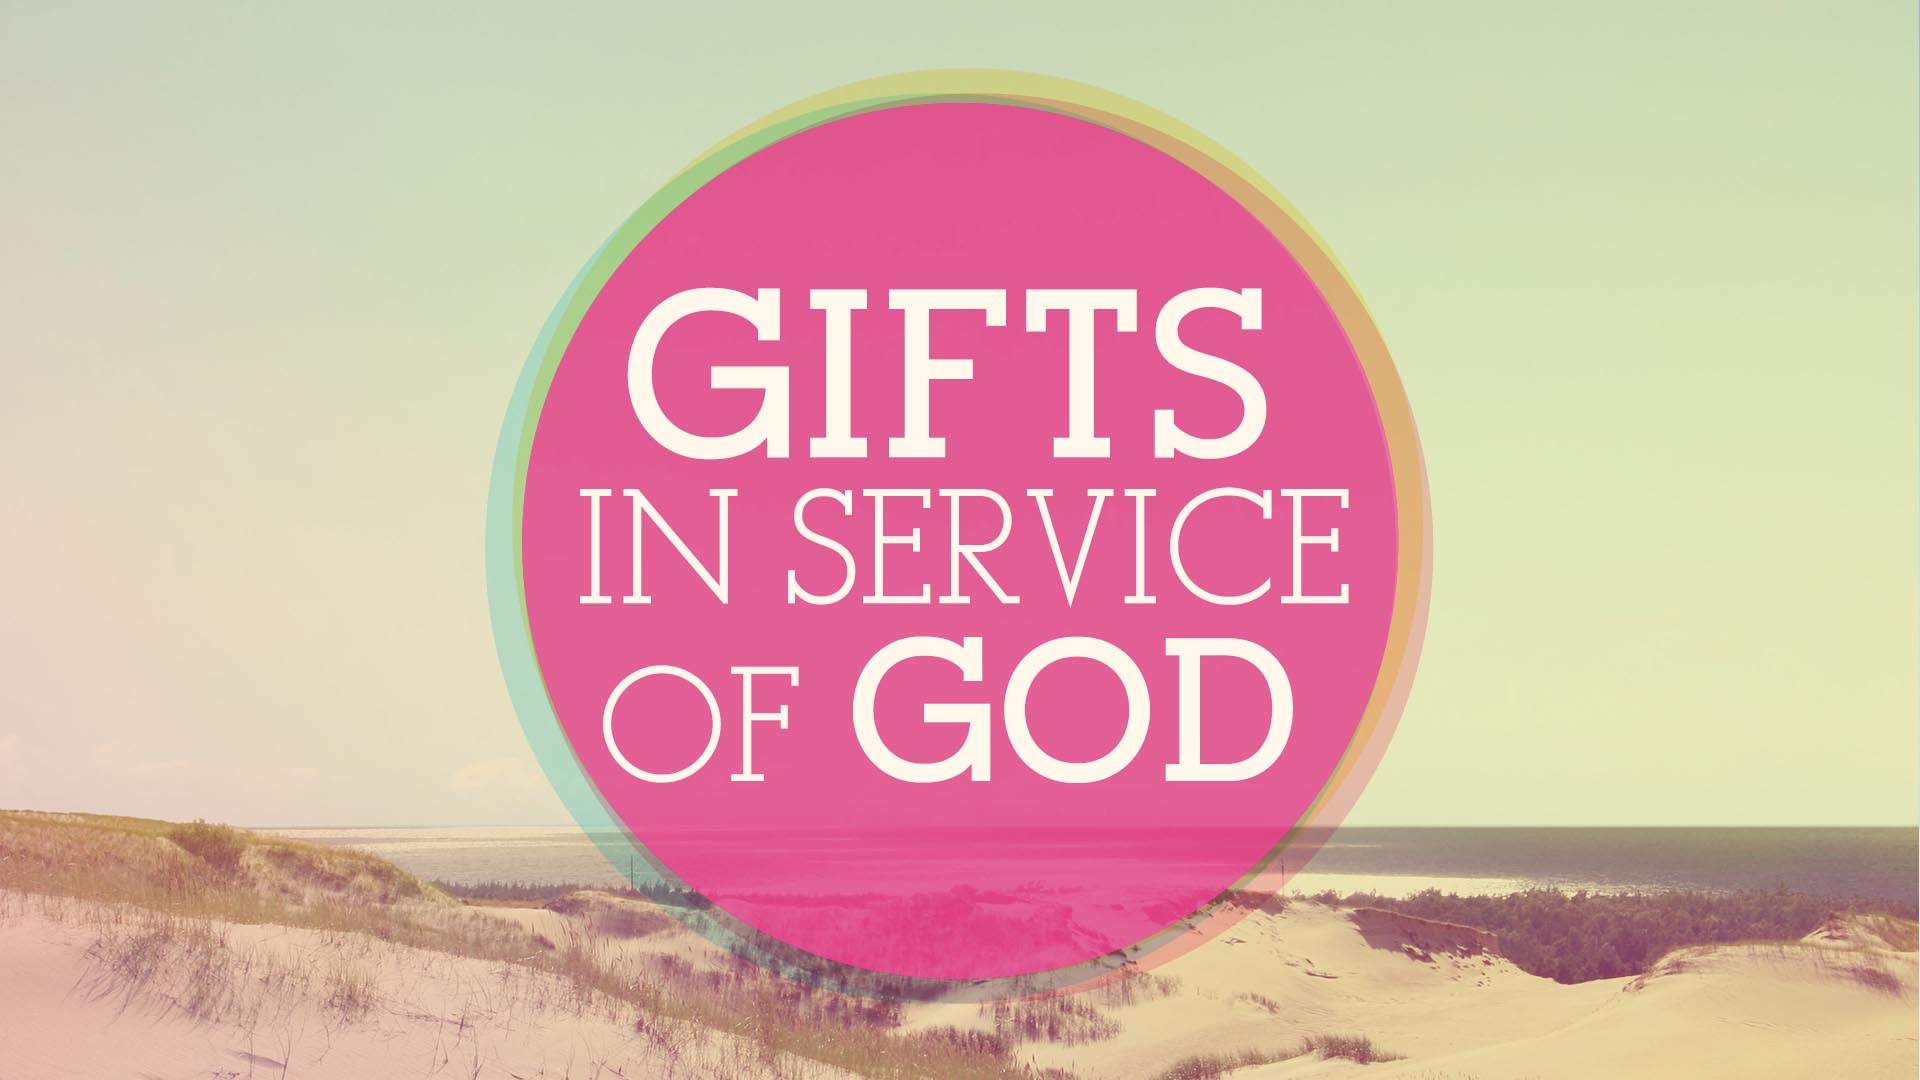 "Gifts In Service of God" Message